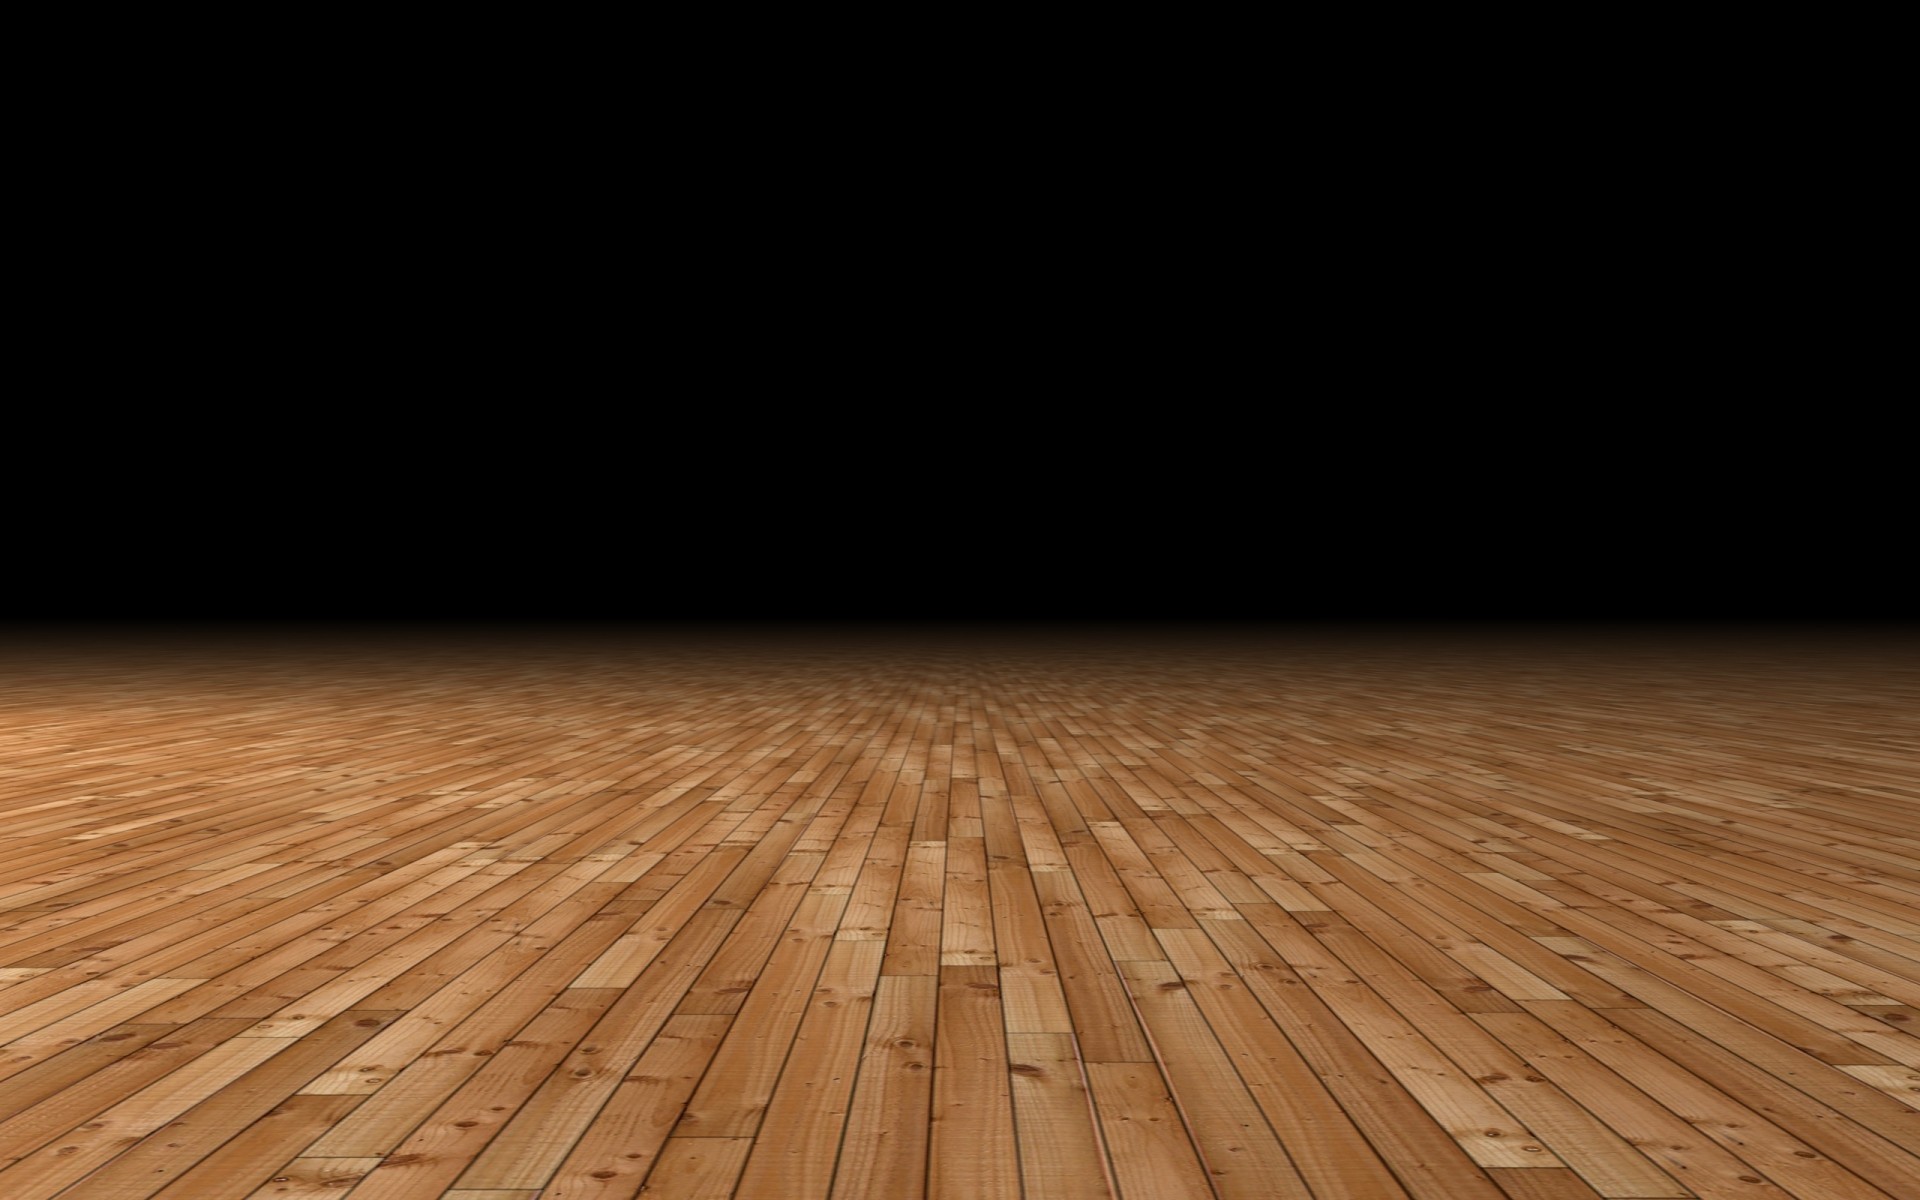 General 1920x1200 minimalism wooden surface simple background